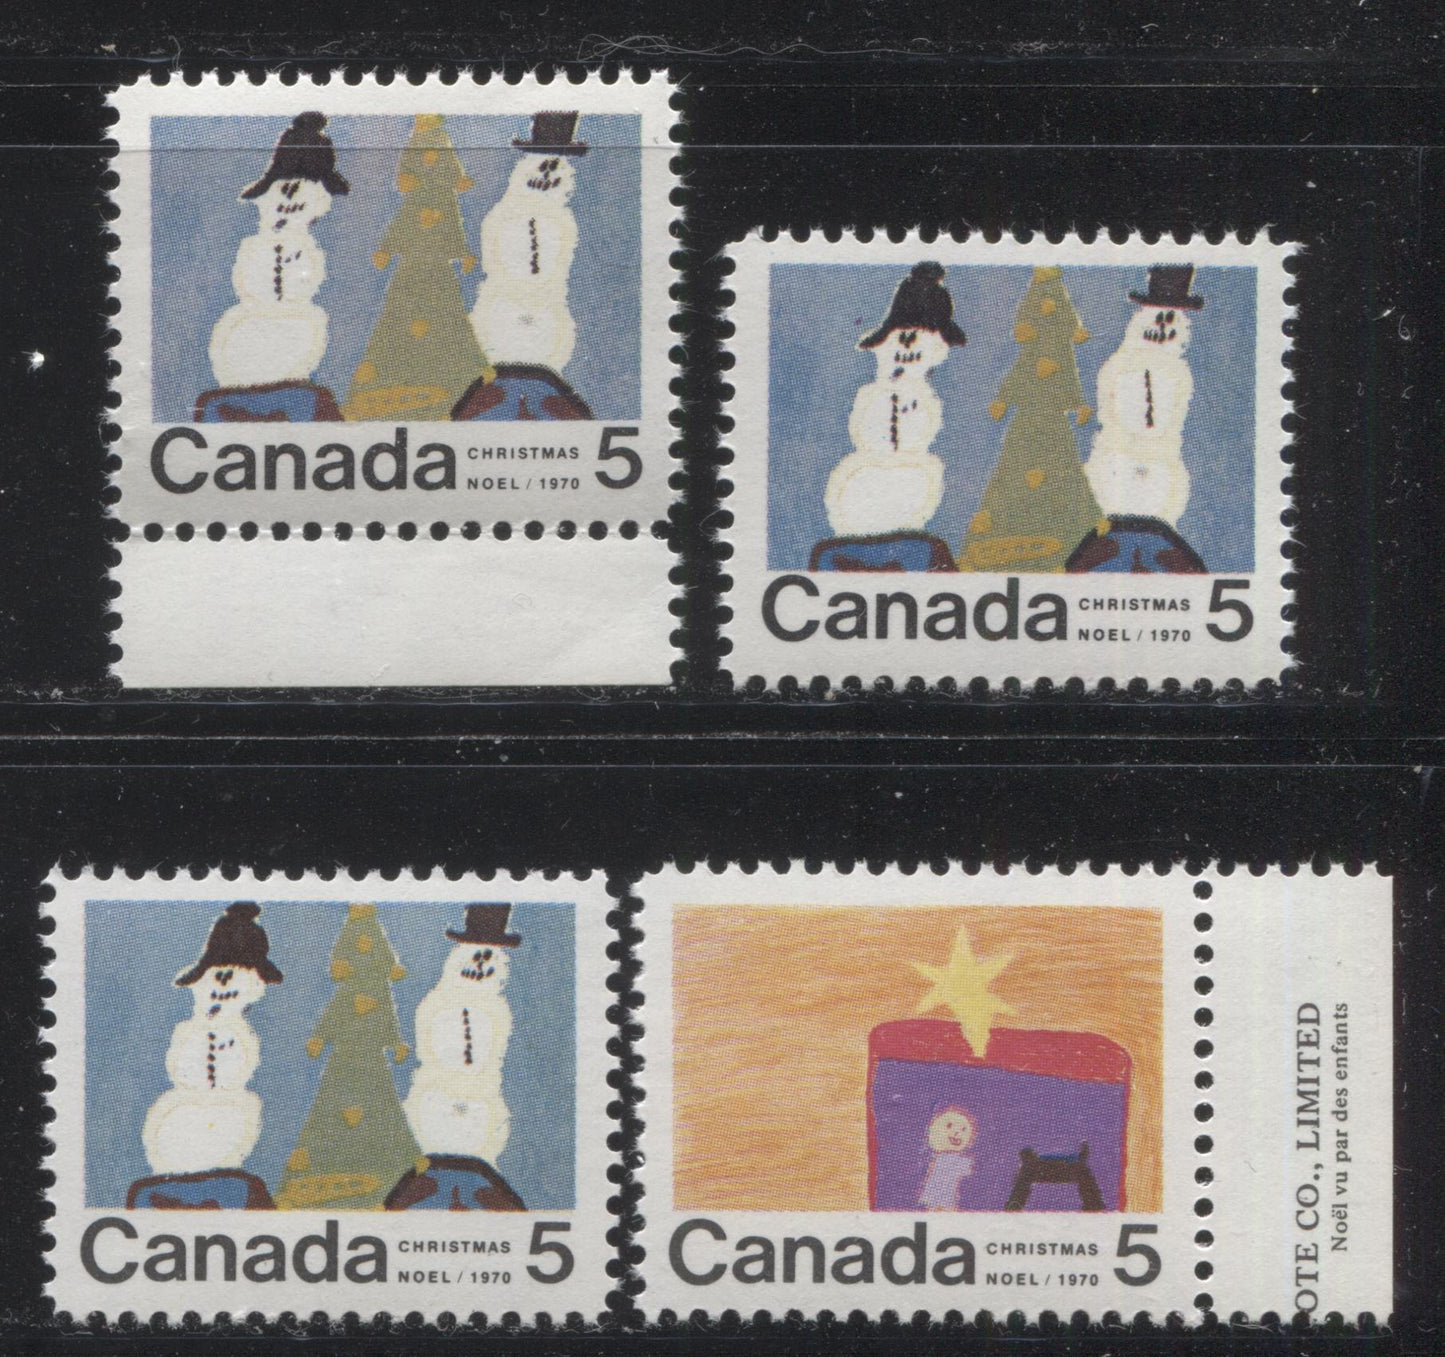 Lot 137 Canada #521, 523 5c Multicoloured 1970 Christmas Issue, A Complete Set of 4 Unique Constant Plate Varieties From Combinations 8 and 10, Smooth HB11 Paper, Perf. 11.9